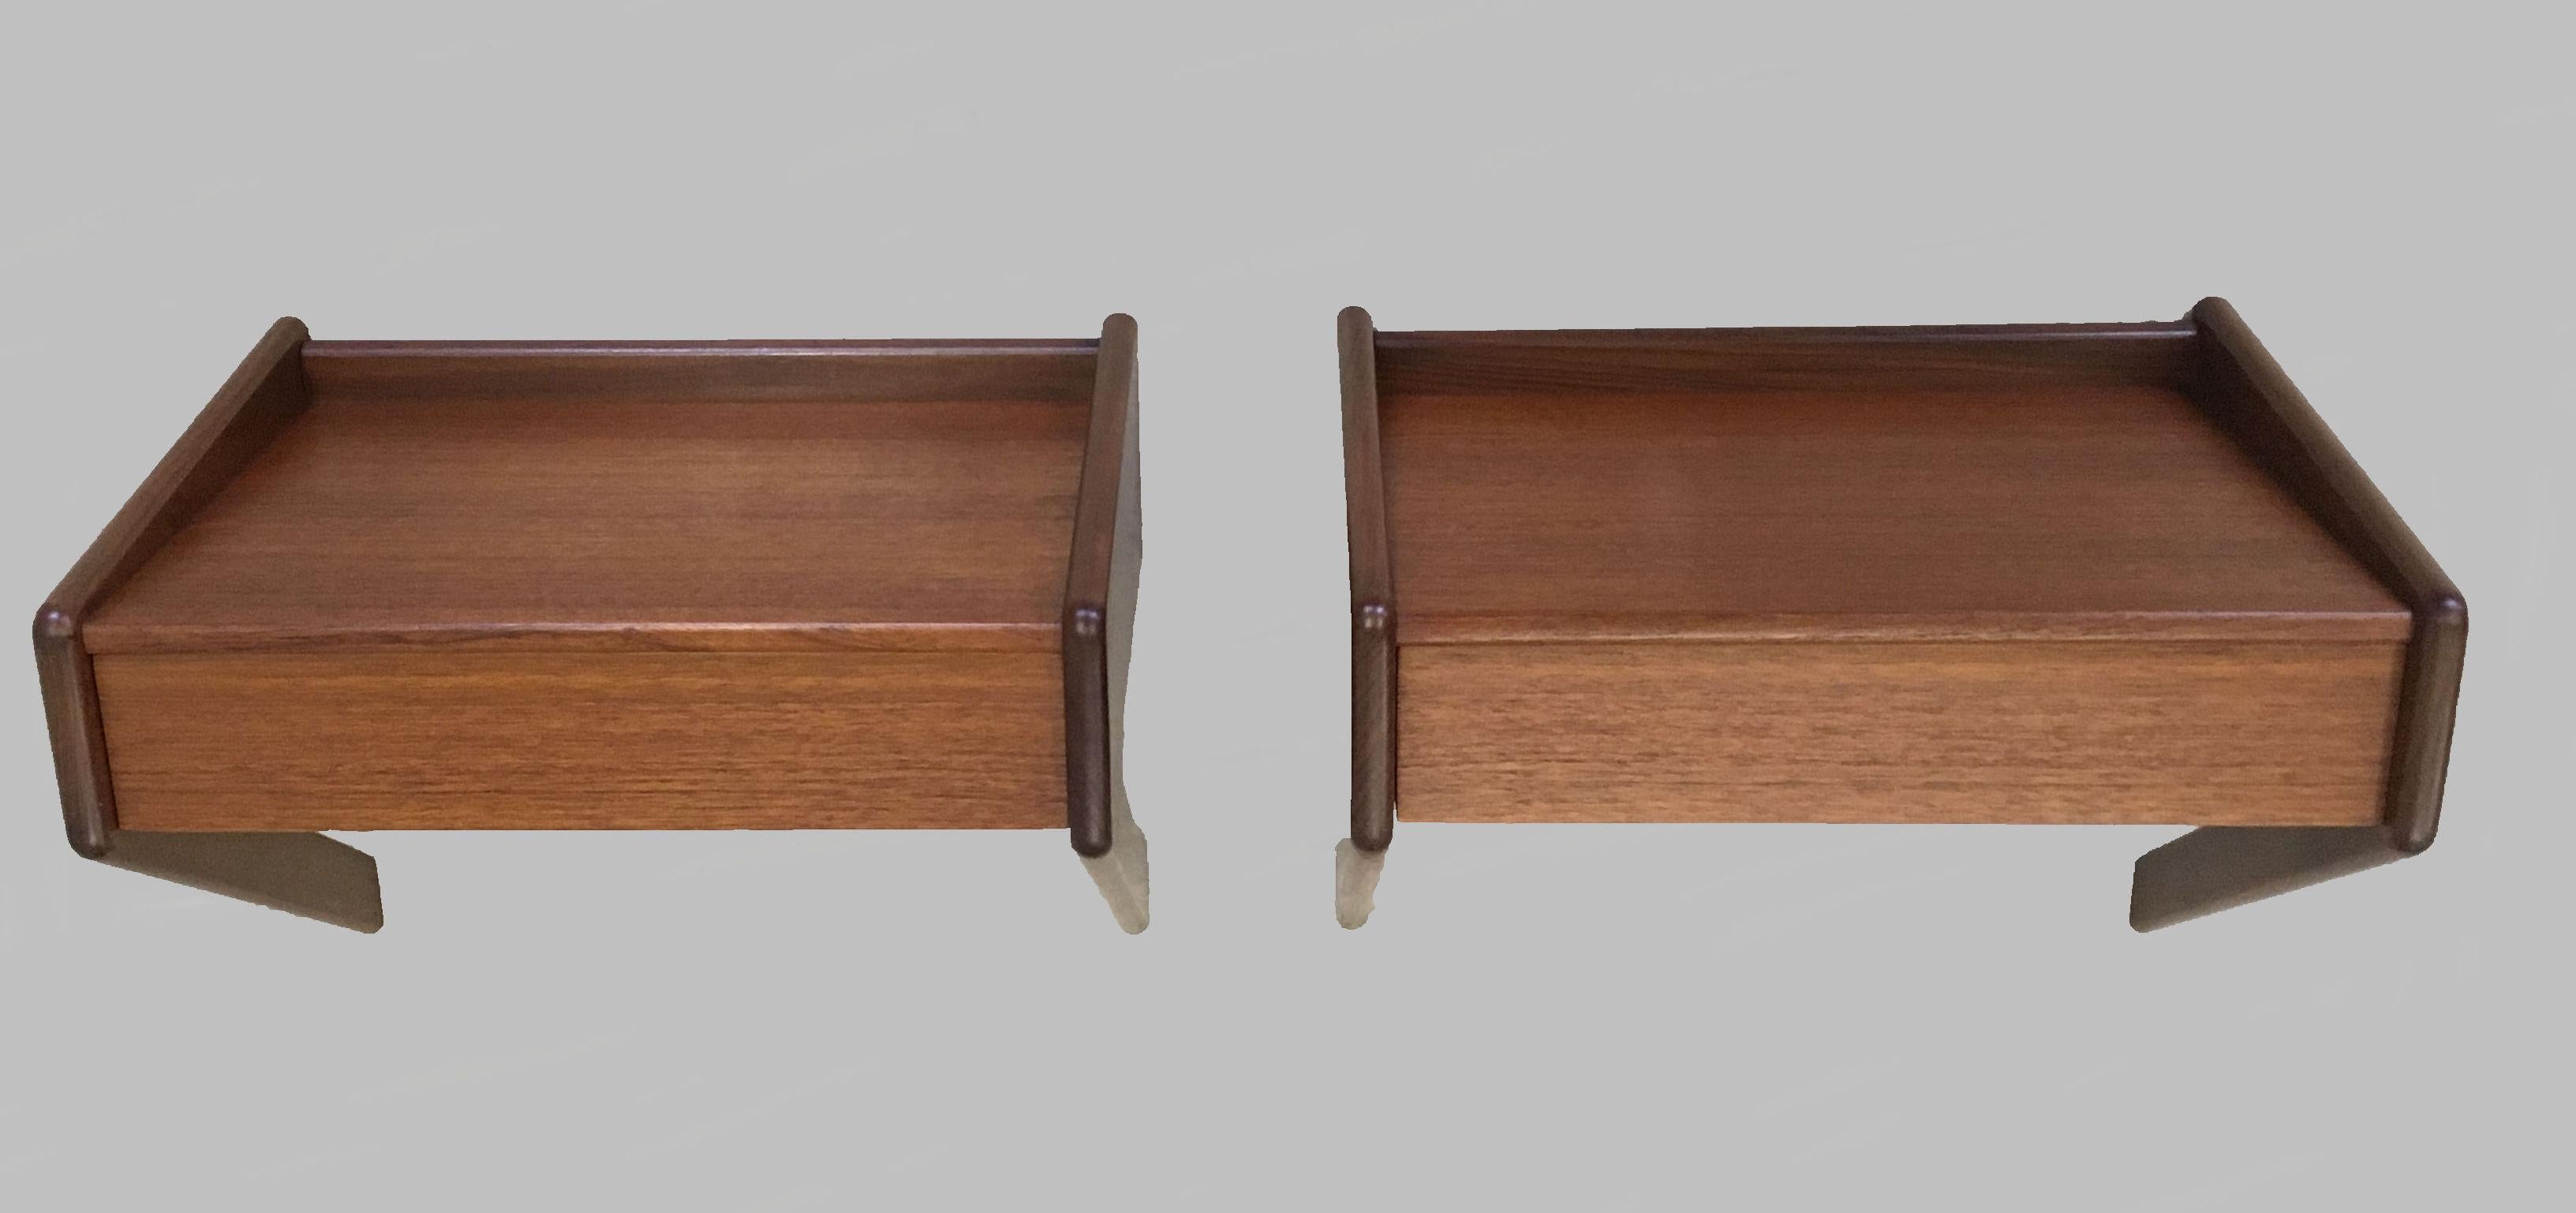 1960s Two Fully Restored Danish Sigfred Omann Floating Nightstands in Teak In Good Condition For Sale In Knebel, DK